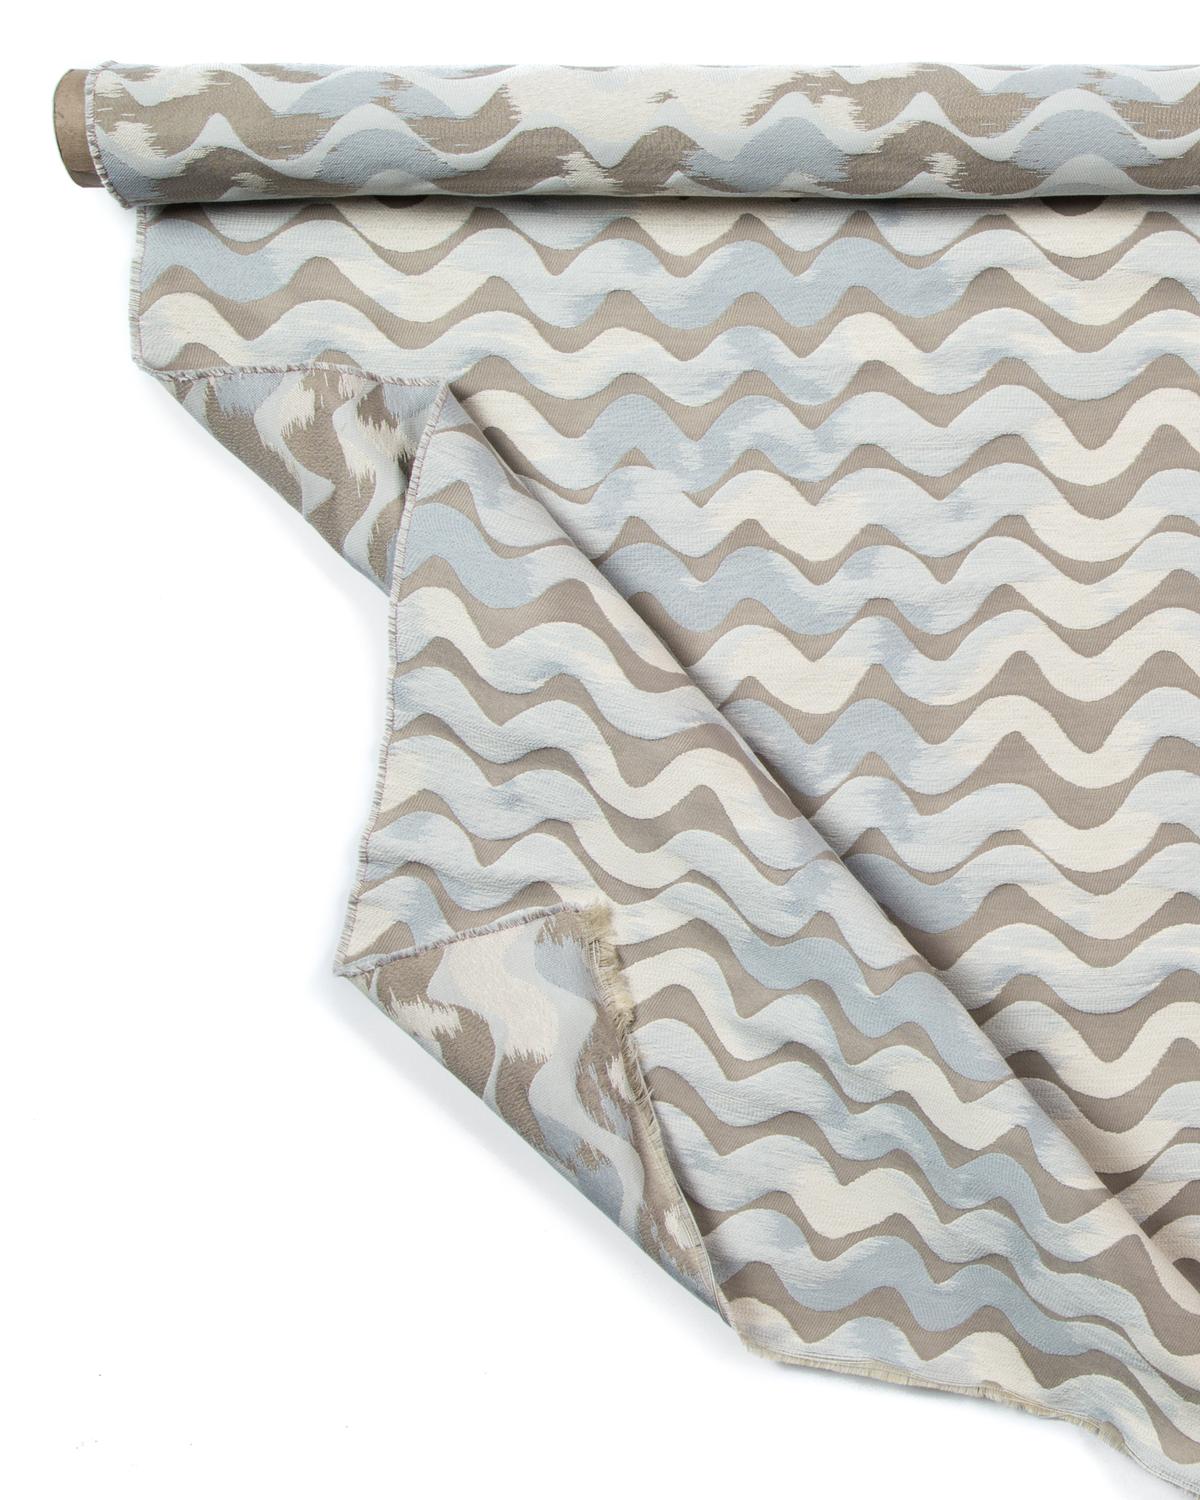 Tidal Wave Fabric in Taupe